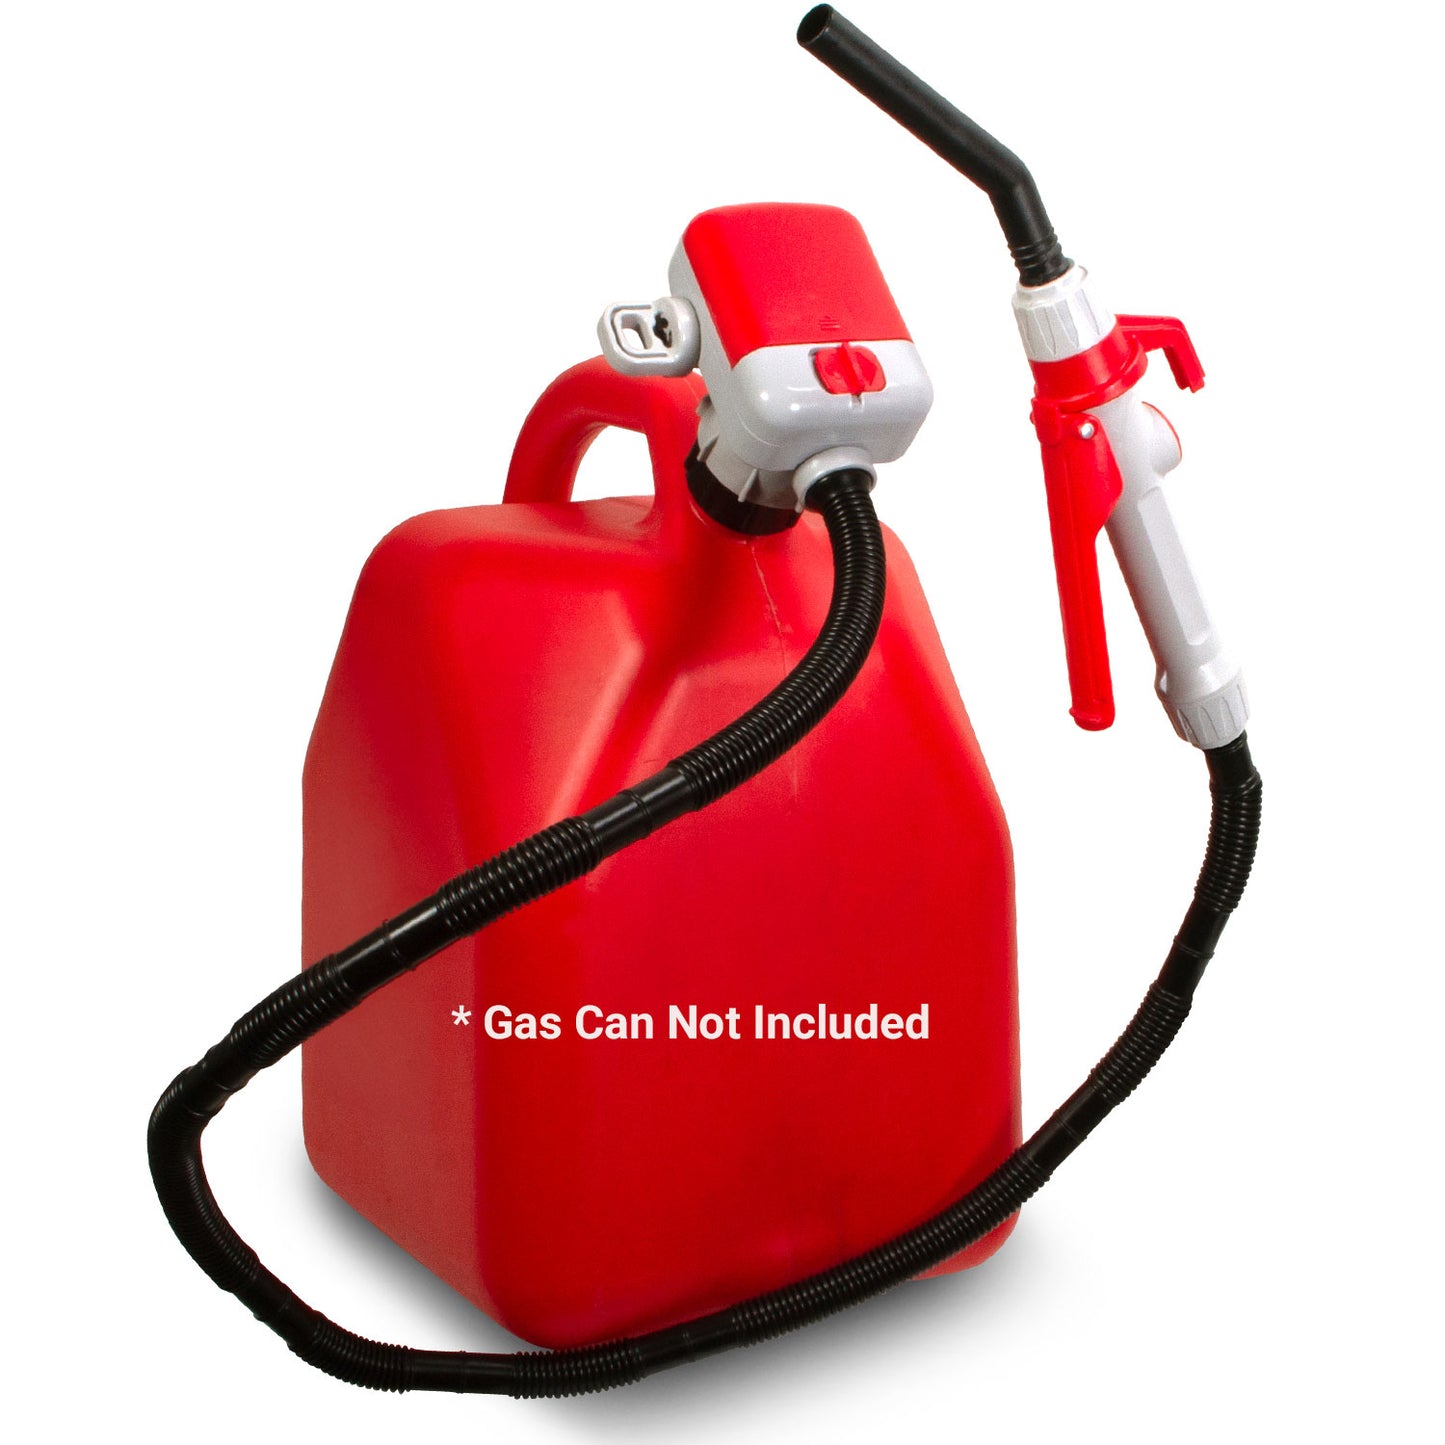 TRFA02-MTX | Gas Can Battery Powered Fuel Transfer Pump